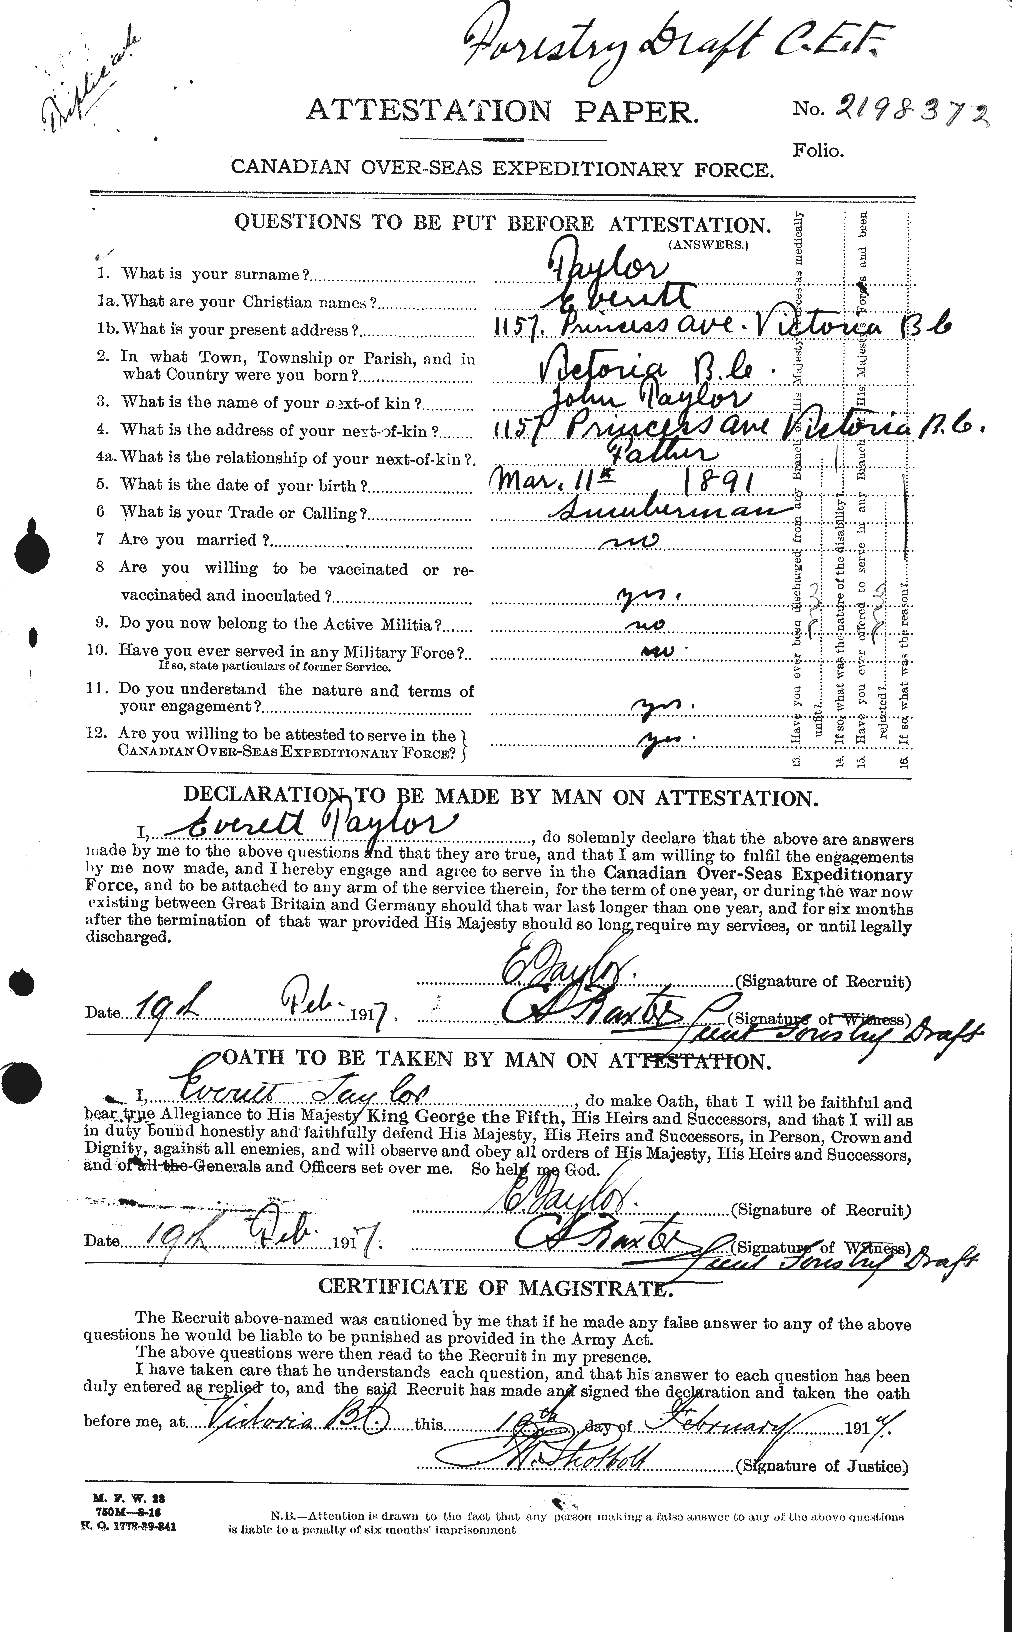 Personnel Records of the First World War - CEF 627410a